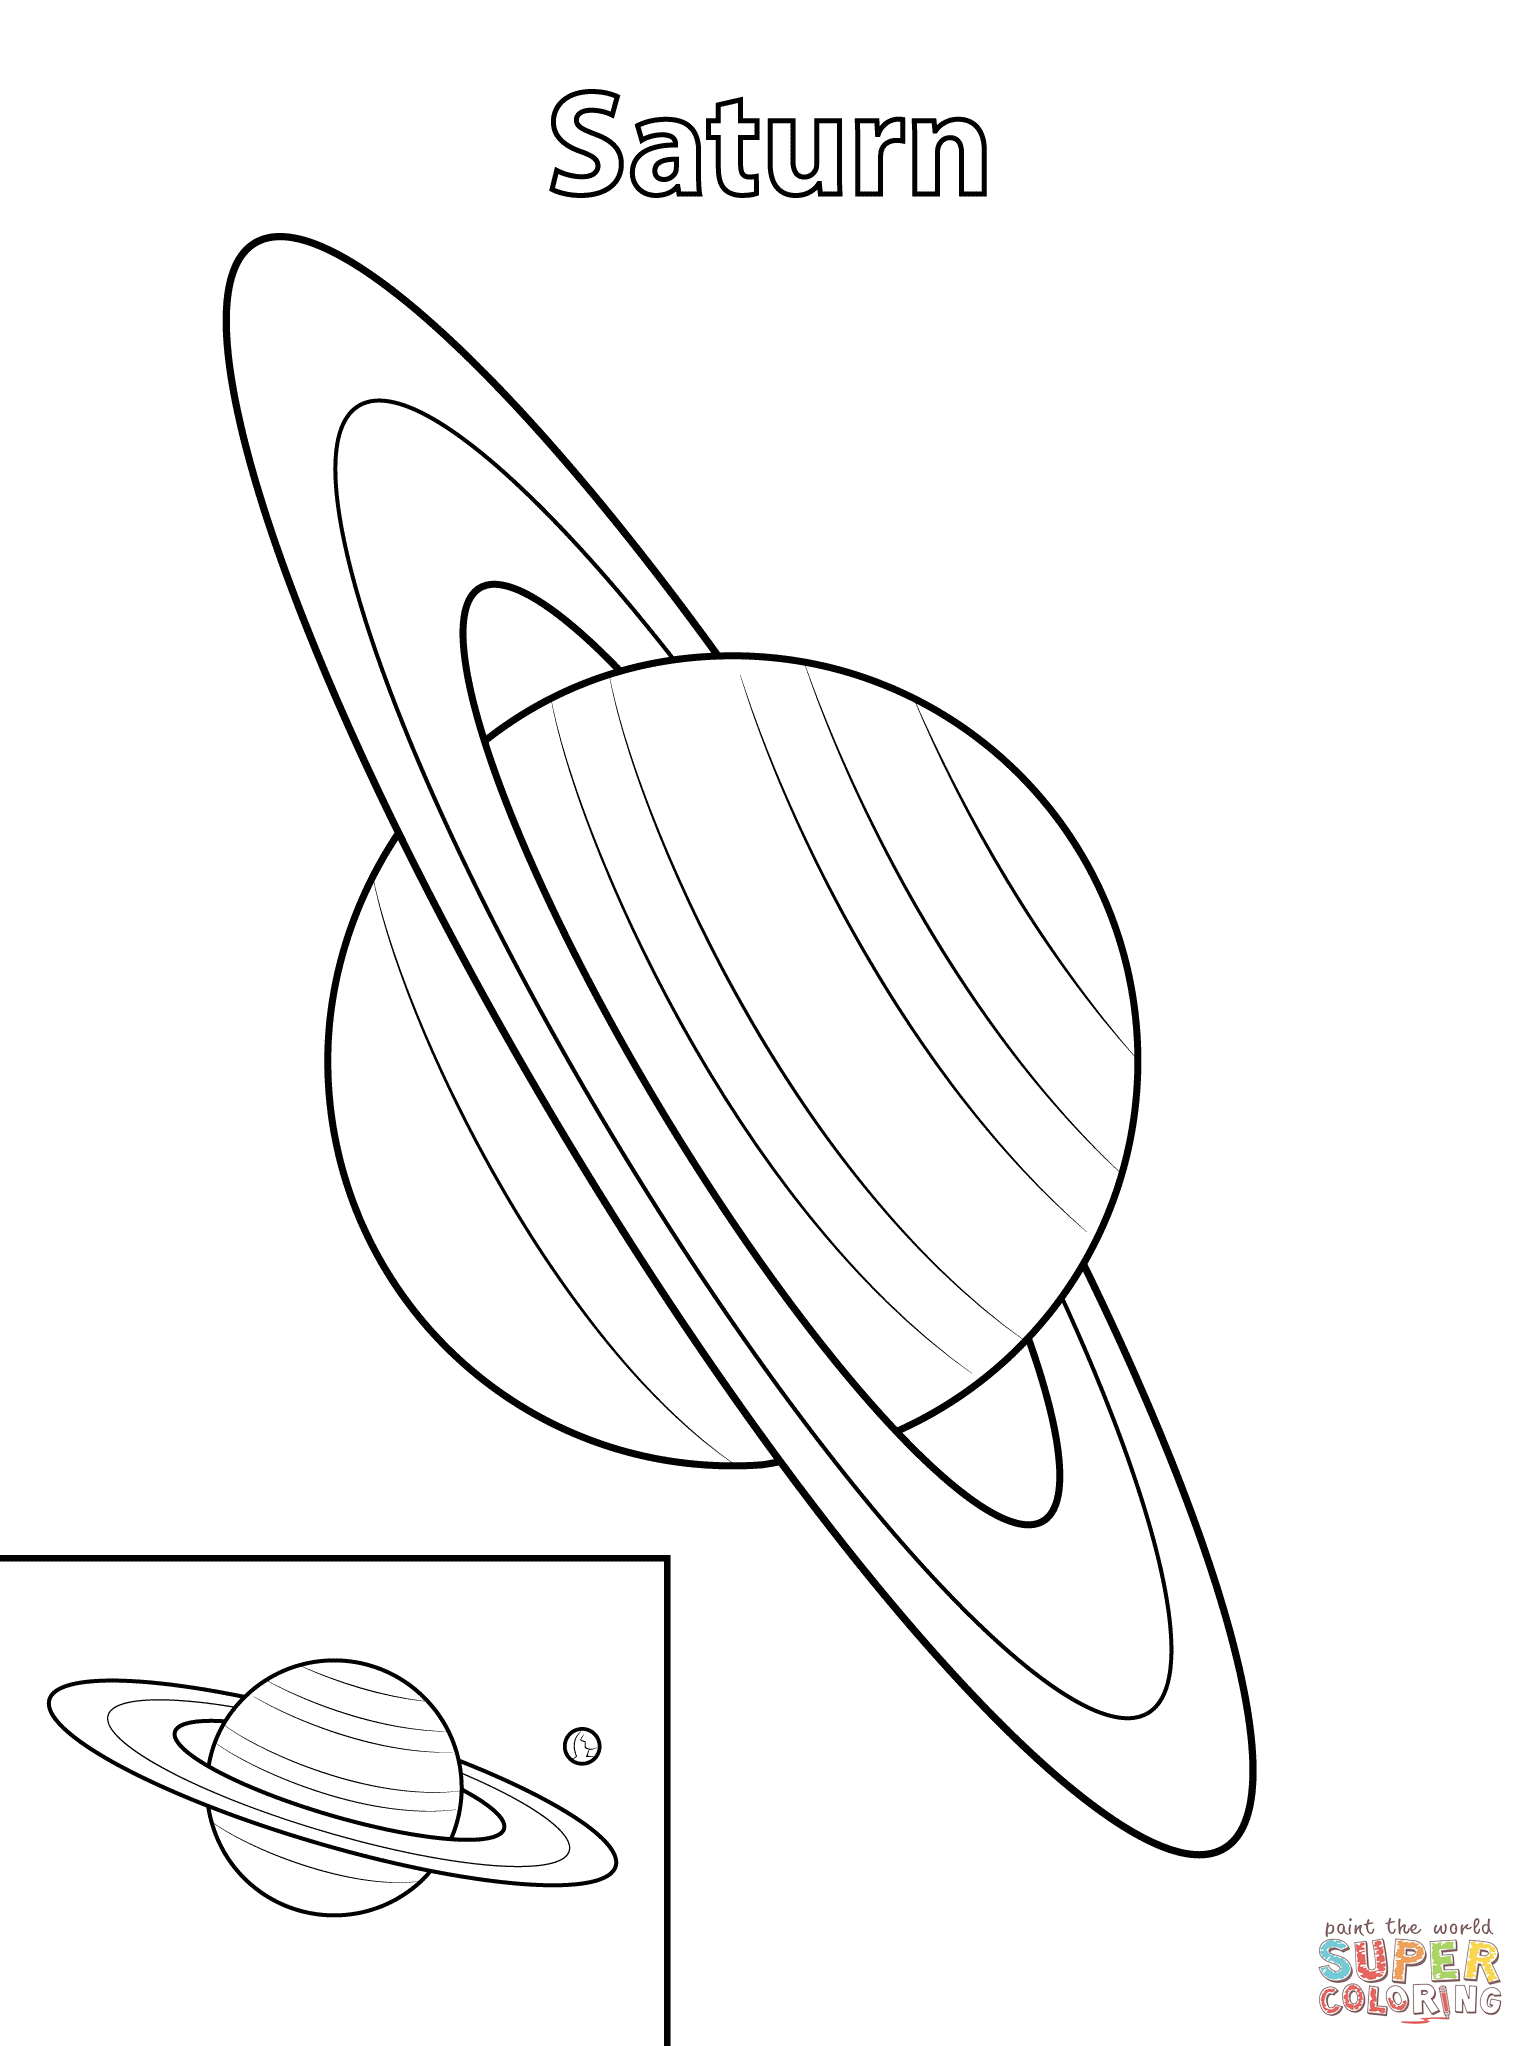 Saturn Planet coloring page | Free Printable Coloring Pages